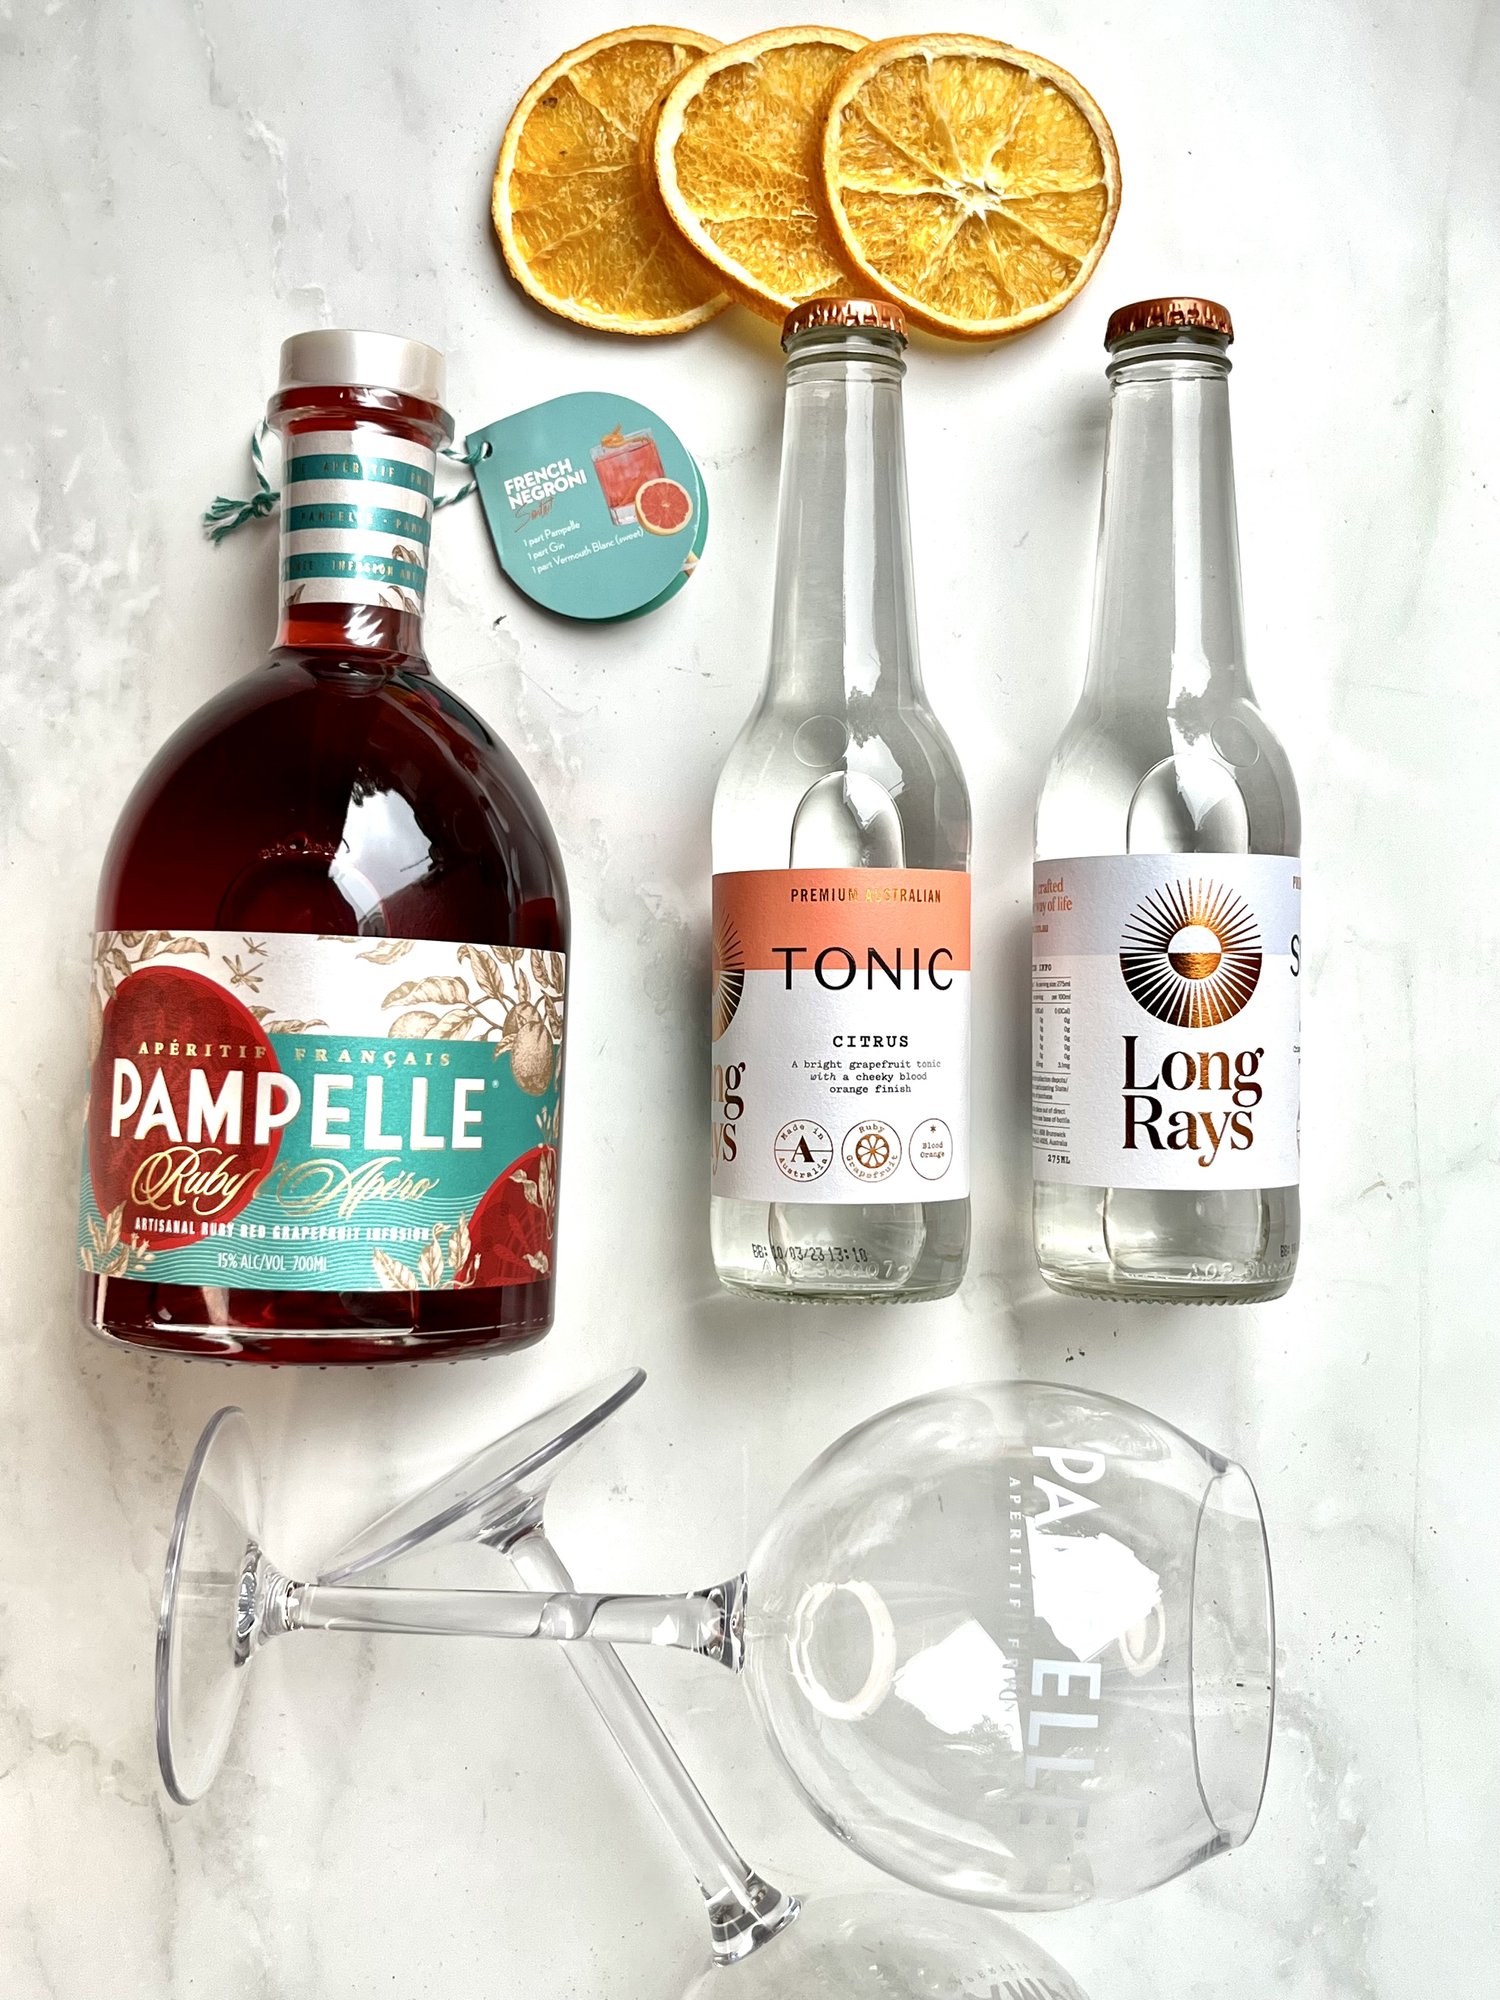 SUMMER APERITIF BY THE POOL - PAMPELLE GIFT WITH GLASSES — 161 CELLARS